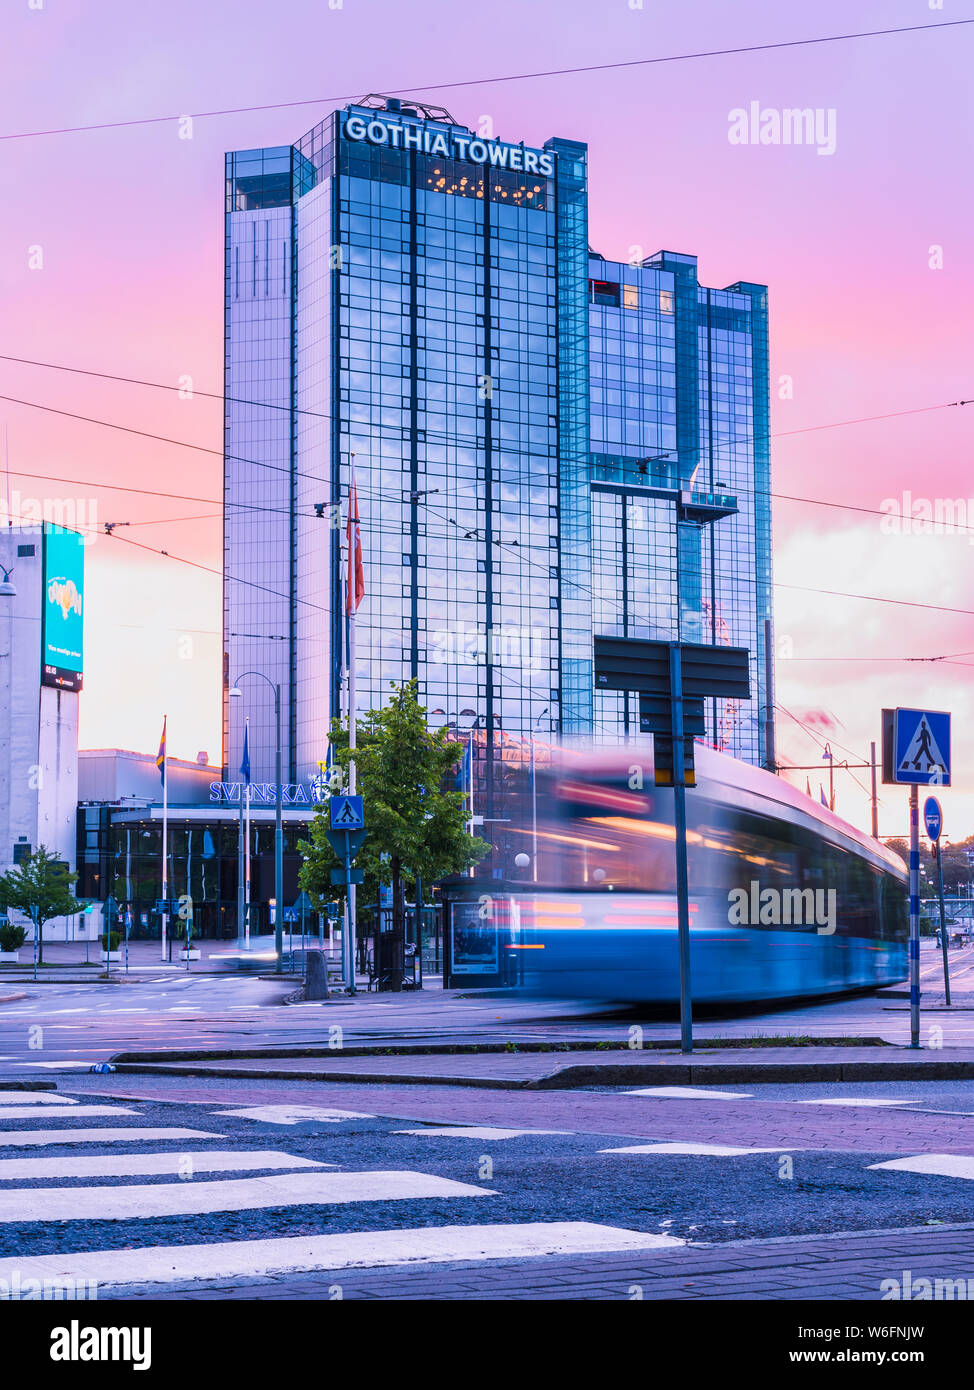 13/08-17, Goteborg, Sweden. The first Tram of the day is passing on the normally busy street of korsvägen. The purple sky is reflected in the glass. Stock Photo